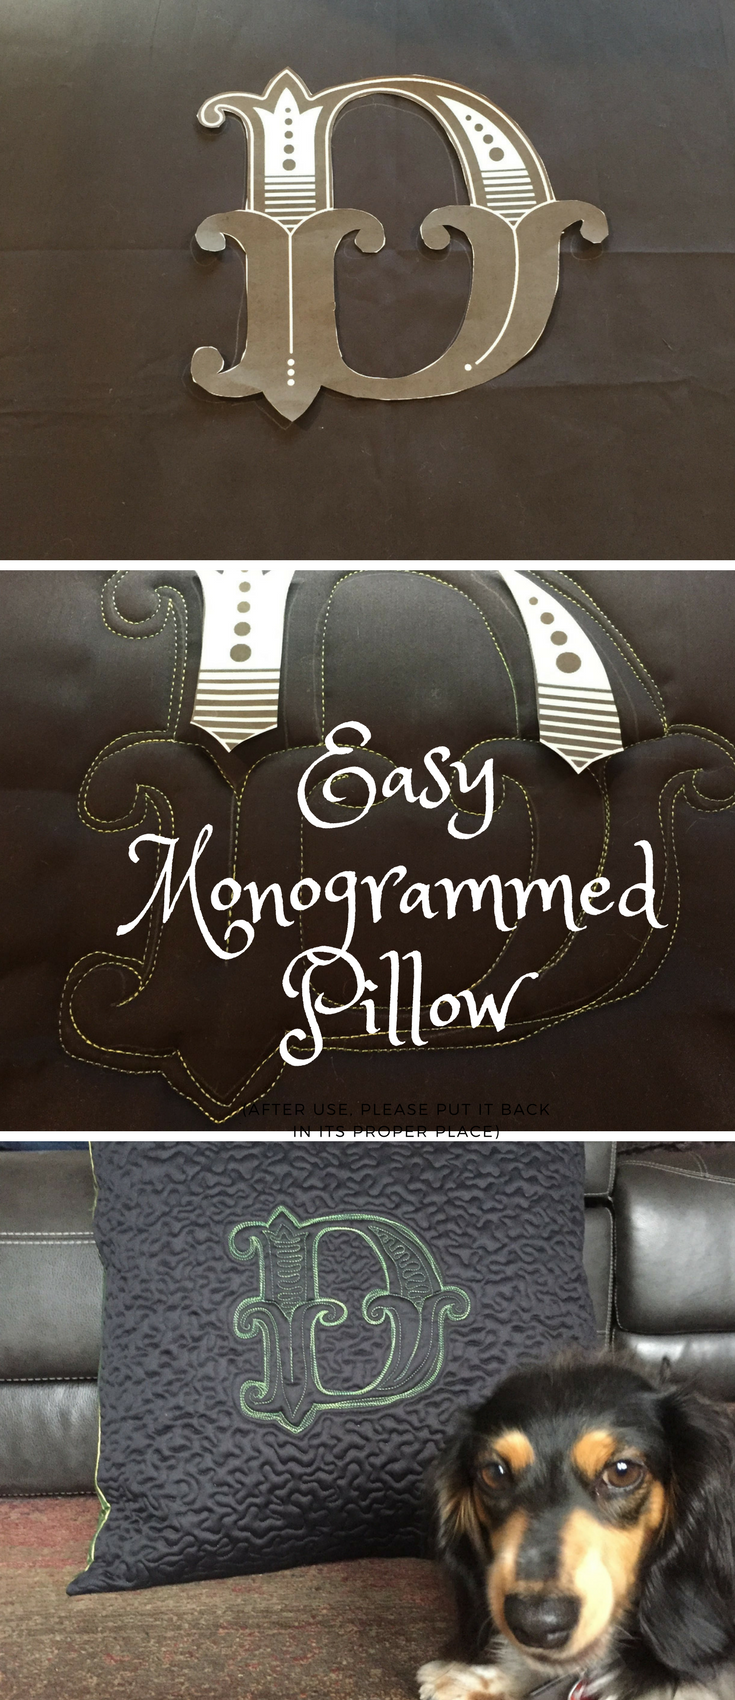 Check out this awesome DIY monogrammed pillow. Perfect for a quick gift.